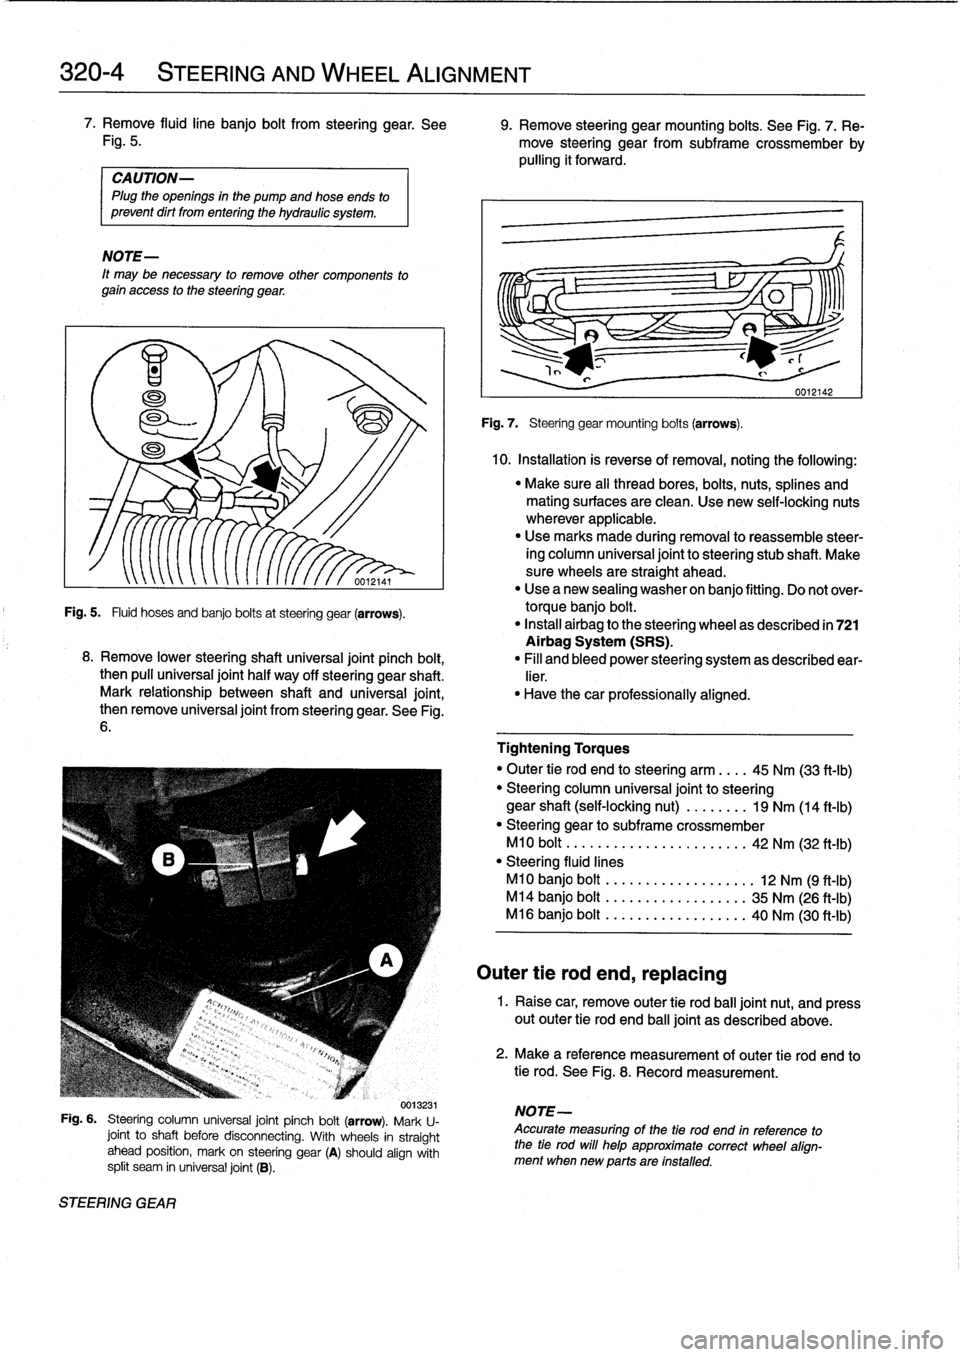 BMW 328i 1994 E36 Workshop Manual 
320-
4

	

STEERING
AND
WHEEL
ALIGNMENT

7
.
Remove
fluidline
banjo
bolt
from
steering
gear
.
See

	

9
.
Remove
steering
gearmounting
bolts
.
See
Fig
.
7
.
Re
Fig
.
5
.

	

move
steering
gear
from
s